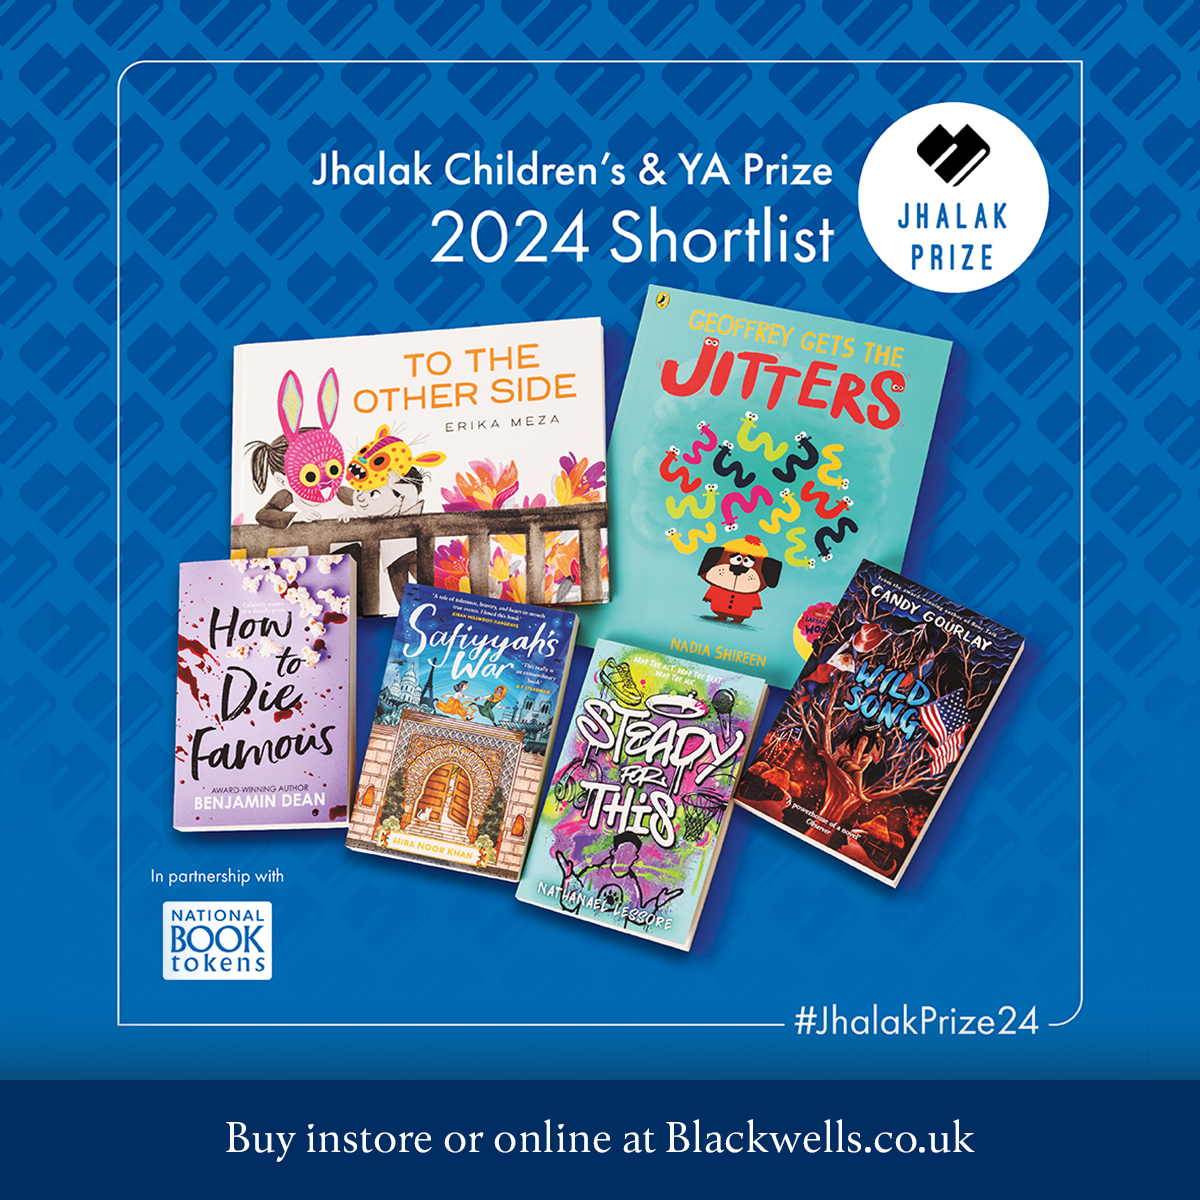 🏆 AND THE NOMINEES ARE... ...and the second ever @jhalakprize Children's & YA Prize shortlist is now a glorious fact. Congratulations, all! 💐 👉 Discover the Jhalak Children's & YA Prize shortlist: Blackwells.co.uk/bookshop/colle…